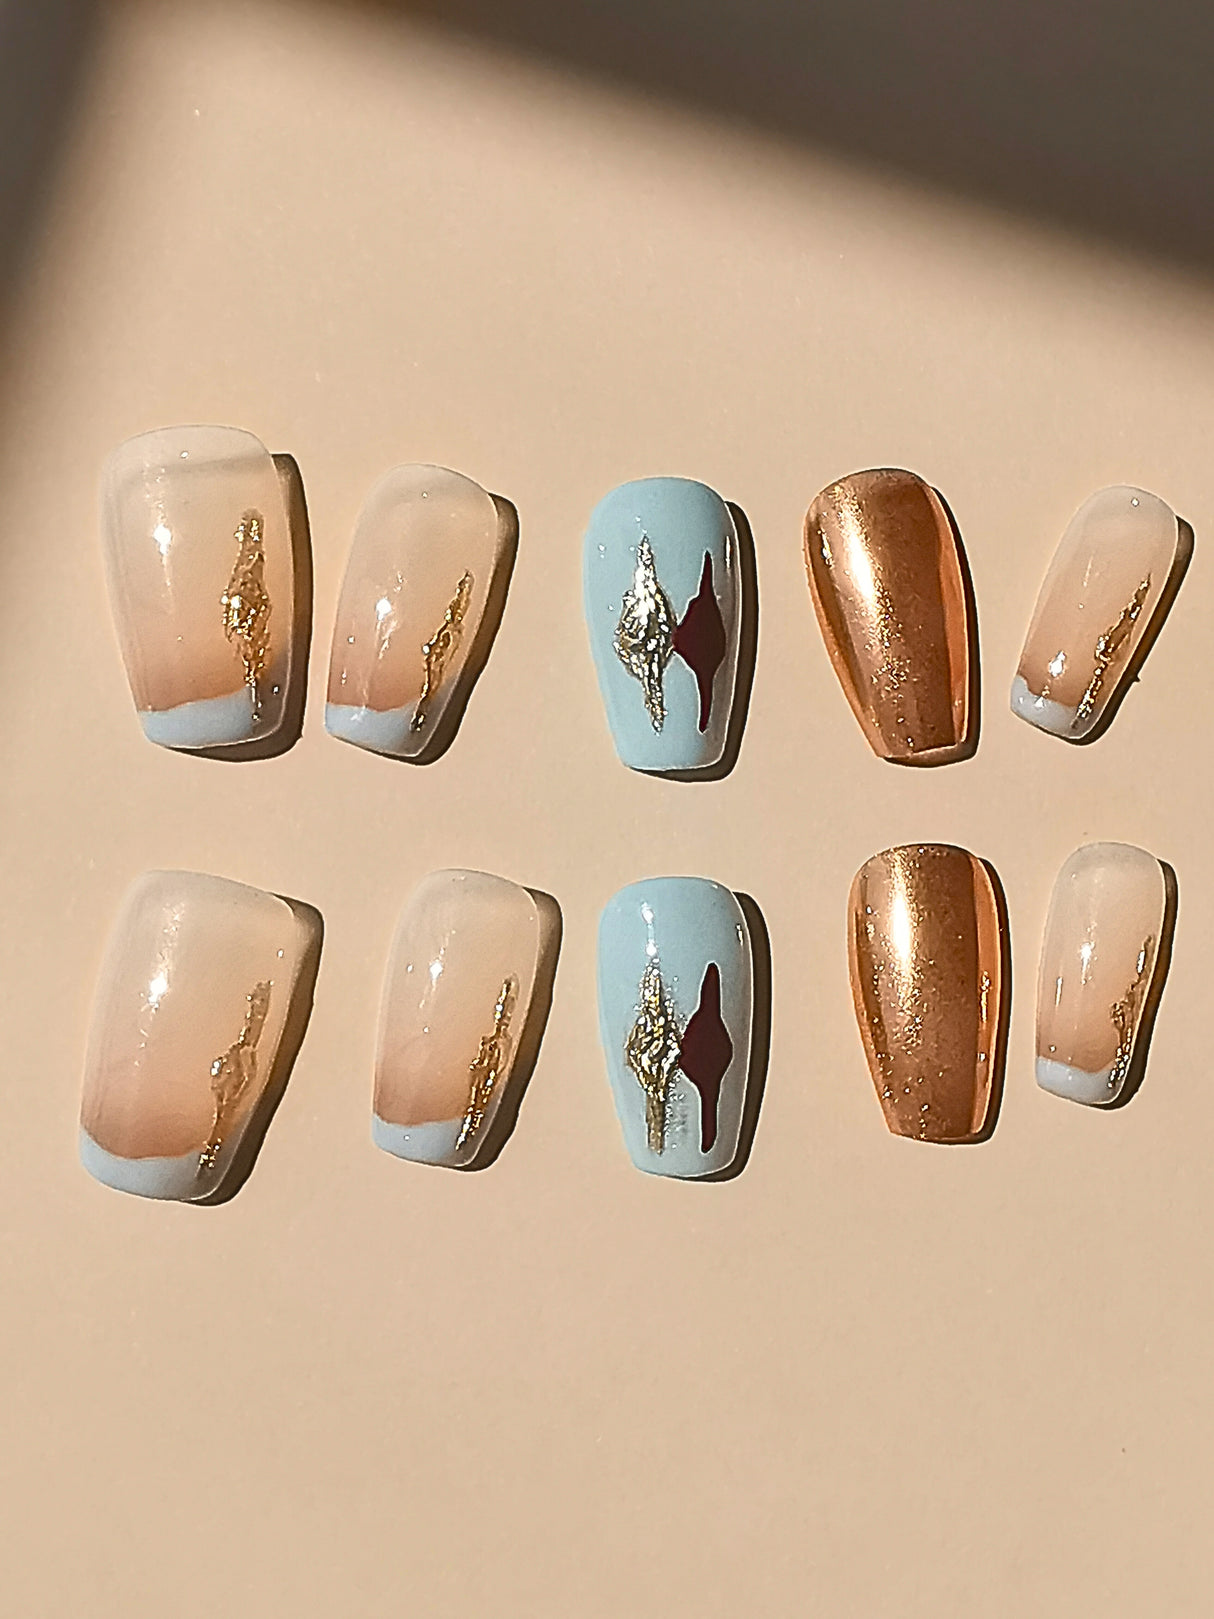 These press-on nails have an ombre design with gold accents and varying sizes for a better fit. They're suitable for special occasions or everyday wear.